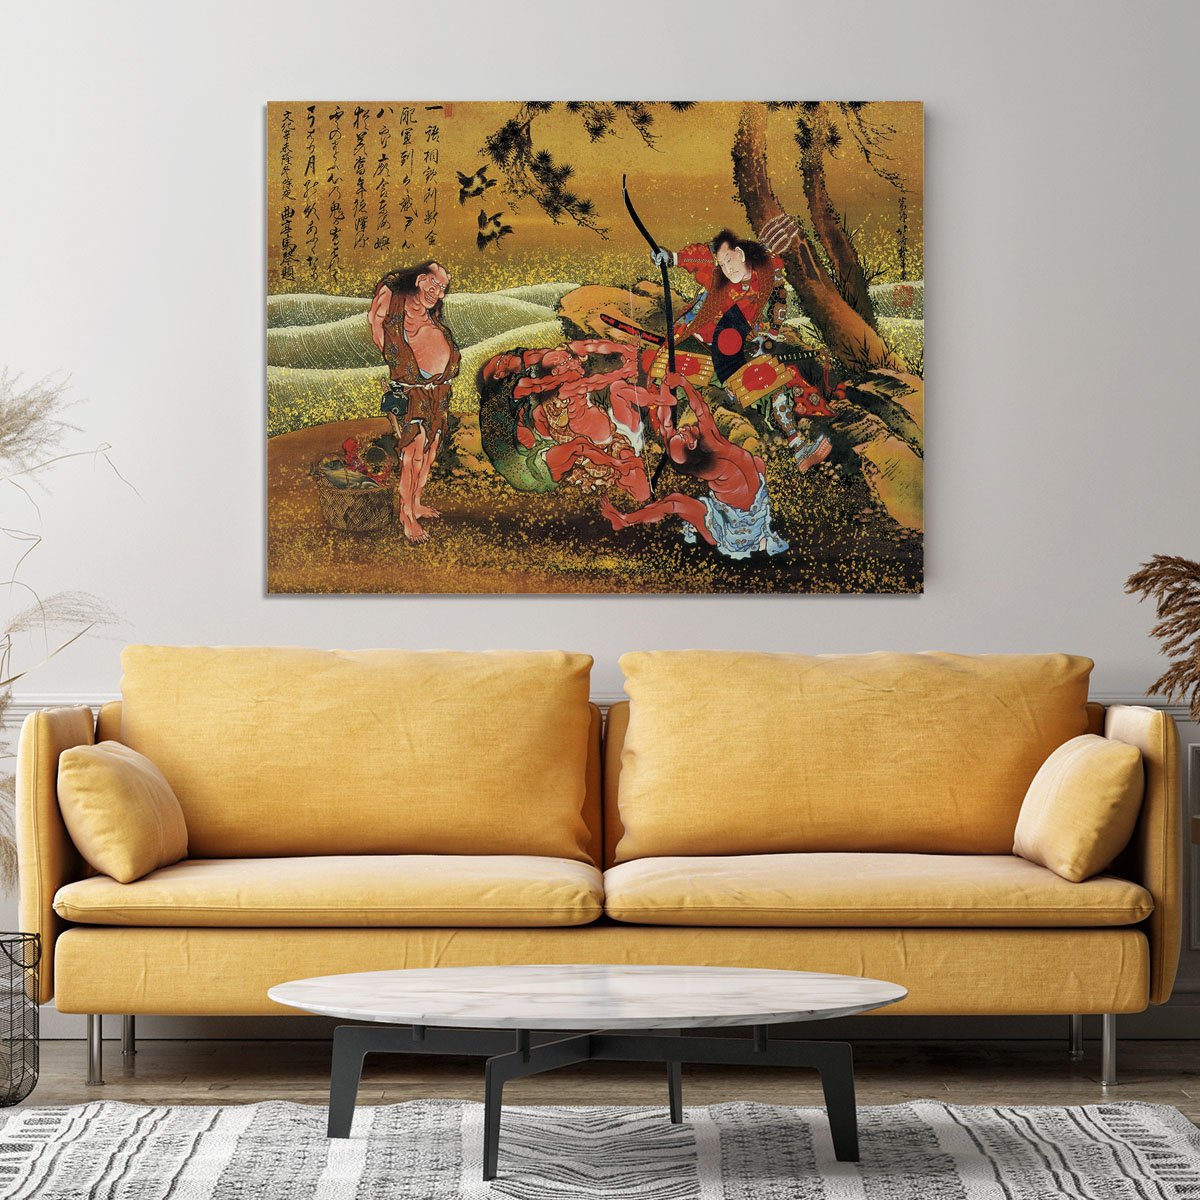 Tametomo and the demons by Hokusai Canvas Print or Poster